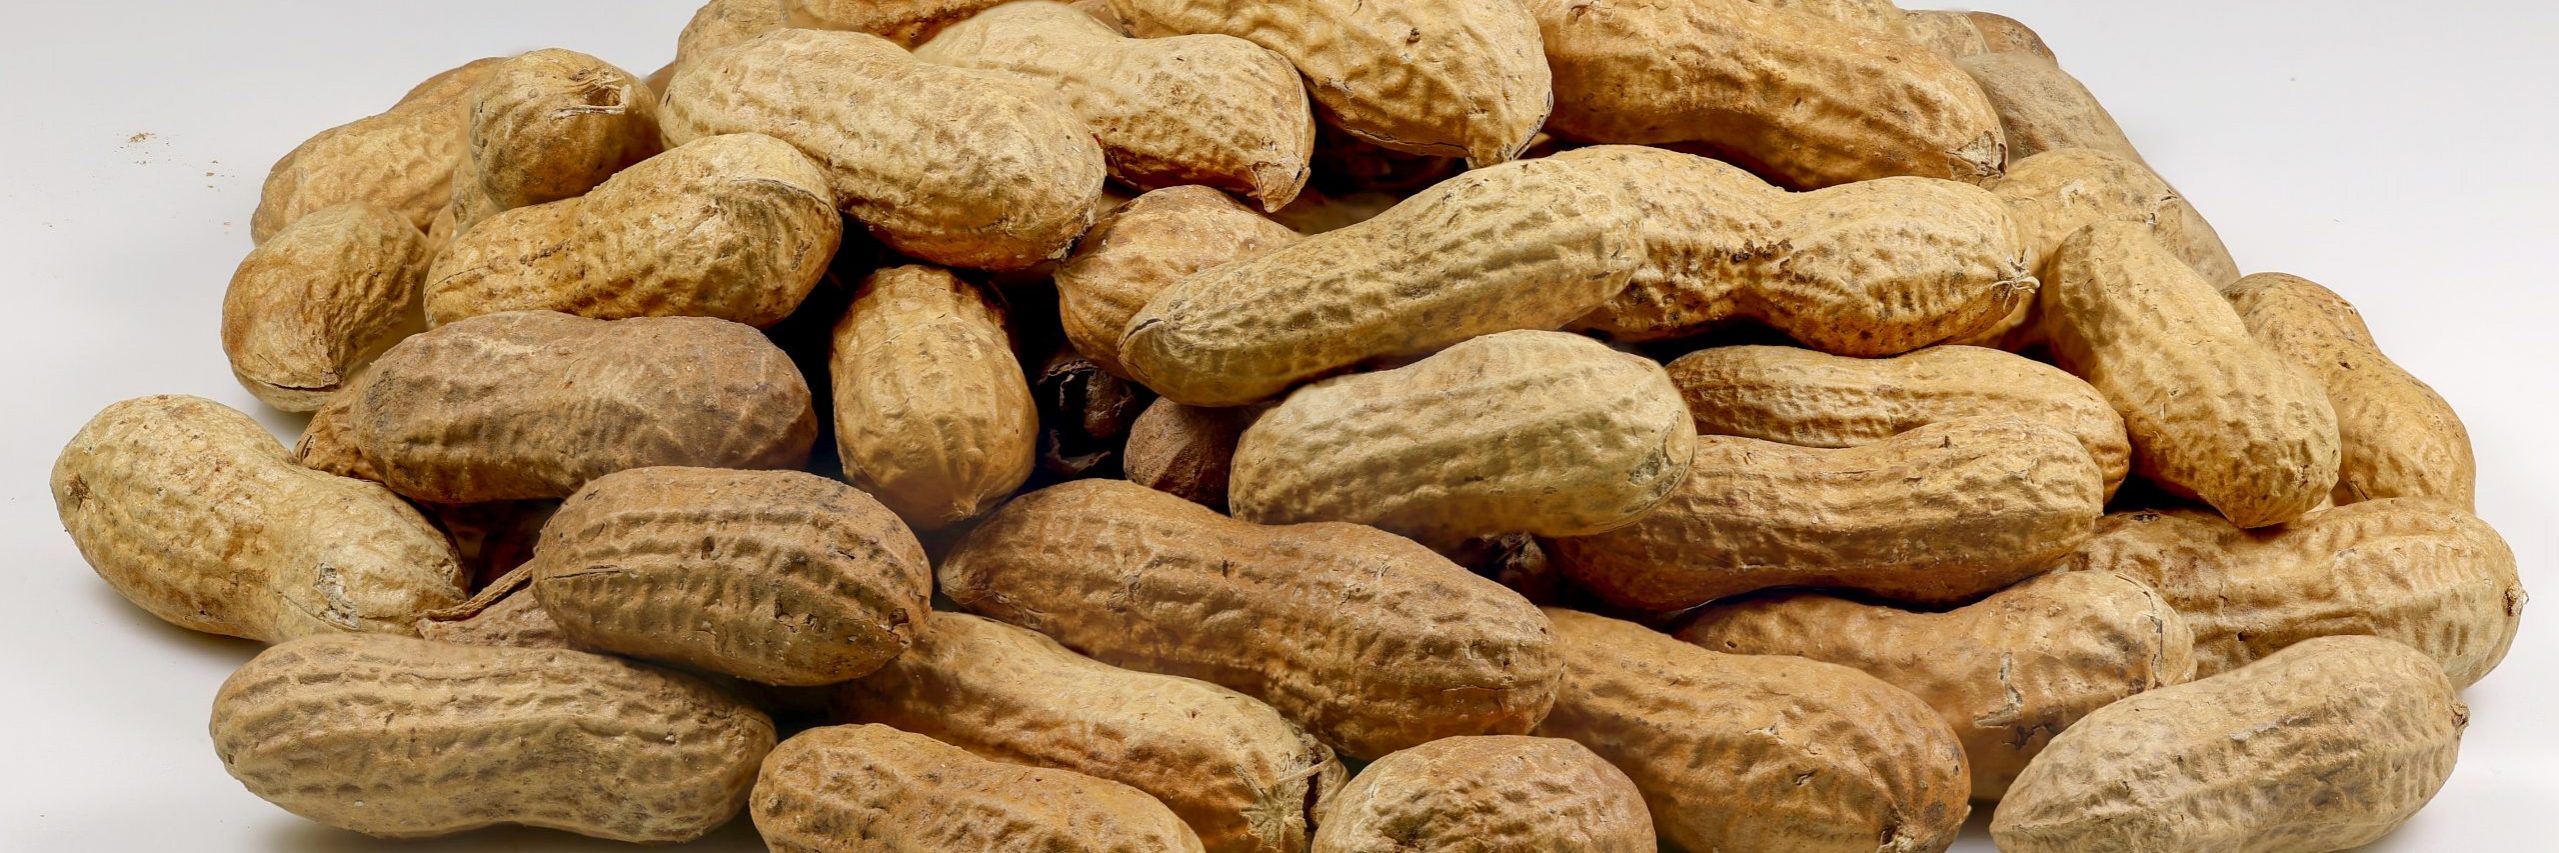 By studying children with peanut allergies, researchers have found that a genetic biomarker may be able to help predict severe food allergy reactions